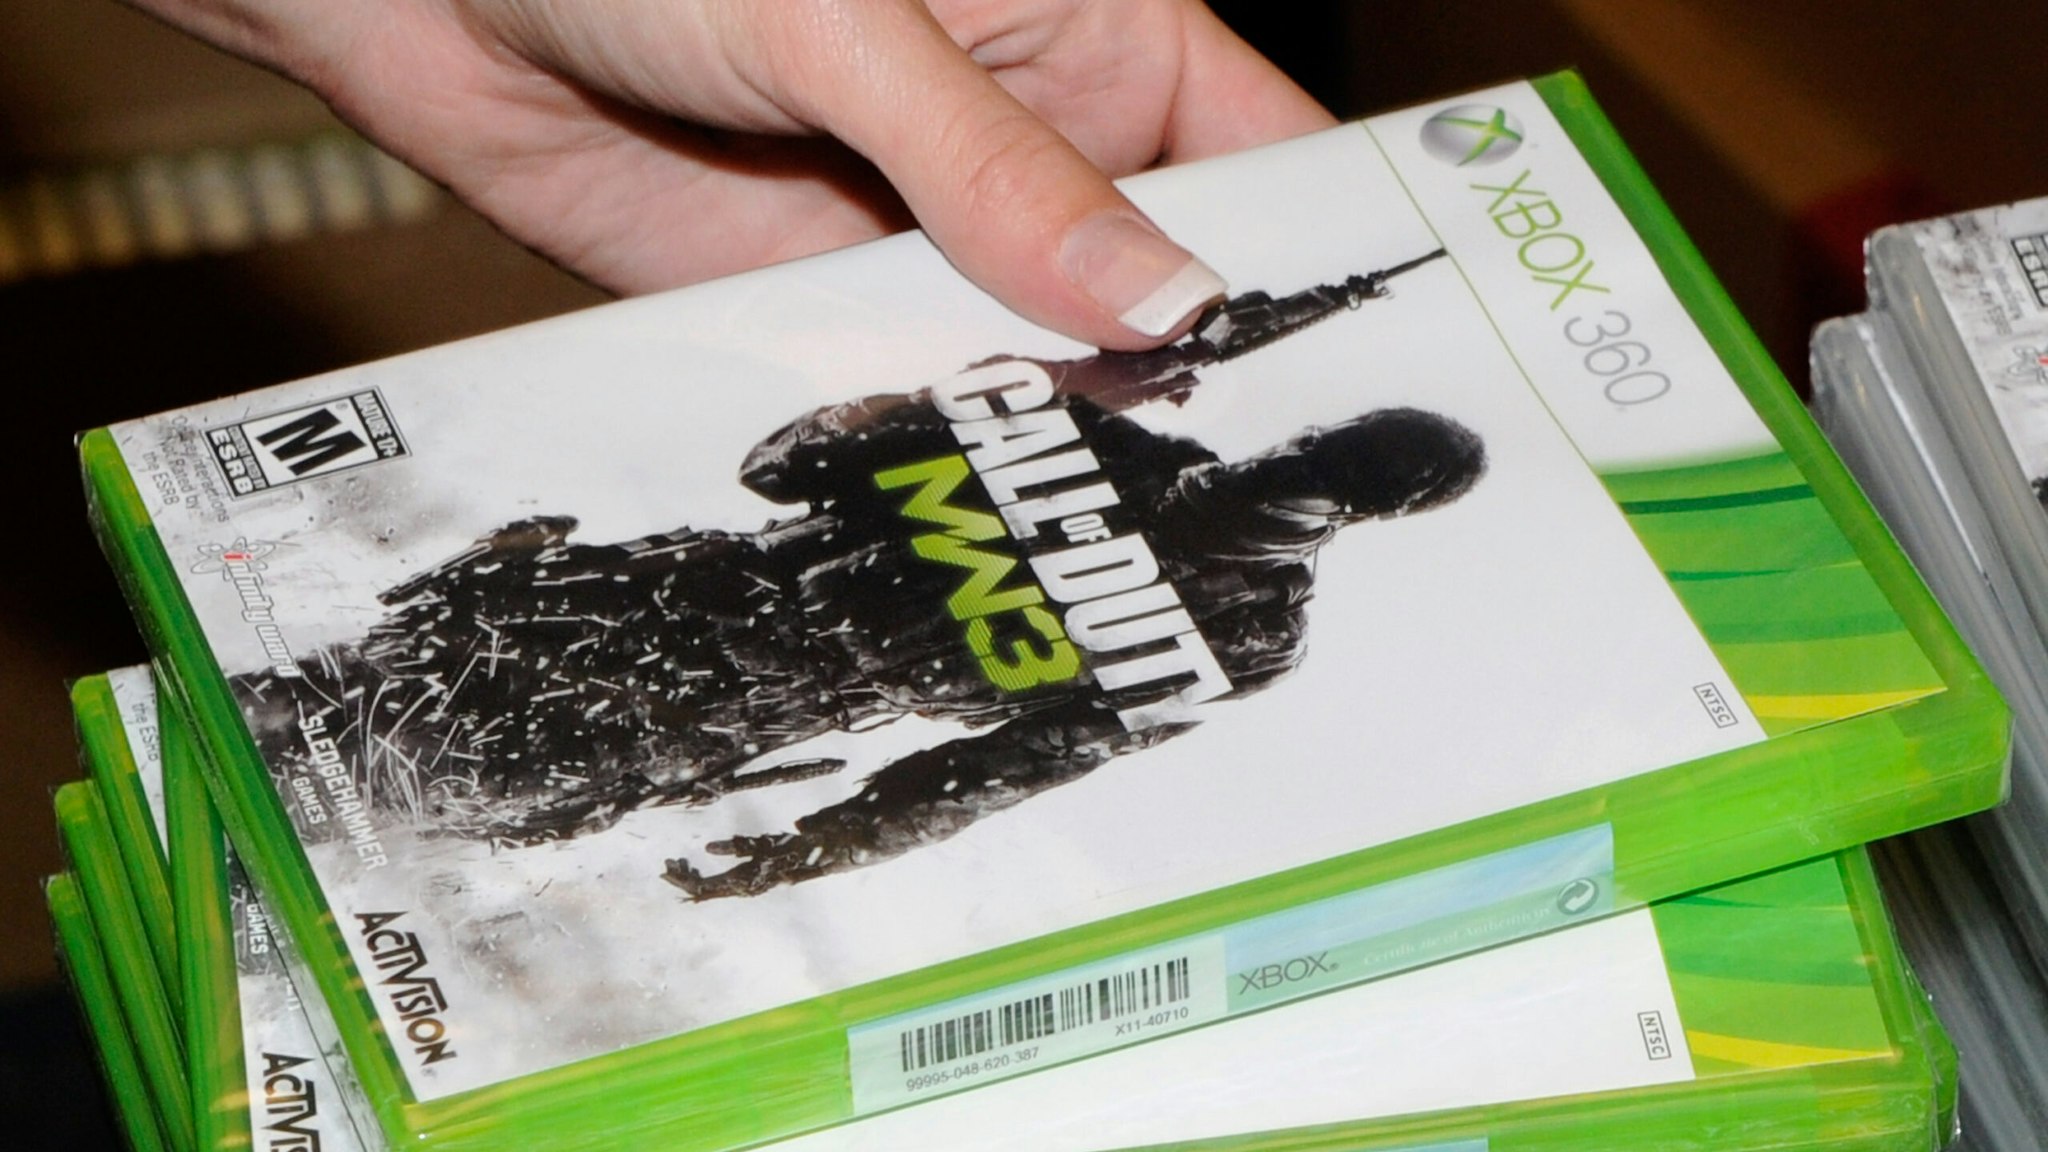 NORTH LAS VEGAS, NV - NOVEMBER 08: GameStop employee Randi Taber rings up copies of "Call of Duty: Modern Warfare 3" for the Xbox 360 during a launch event for the highly anticipated video game at a GameStop Corp. store November 8, 2011 in North Las Vegas, Nevada. Video game publisher Activision released the eighth installment in the "Call of Duty" franchise at midnight. (Photo by Ethan Miller/Getty Images)